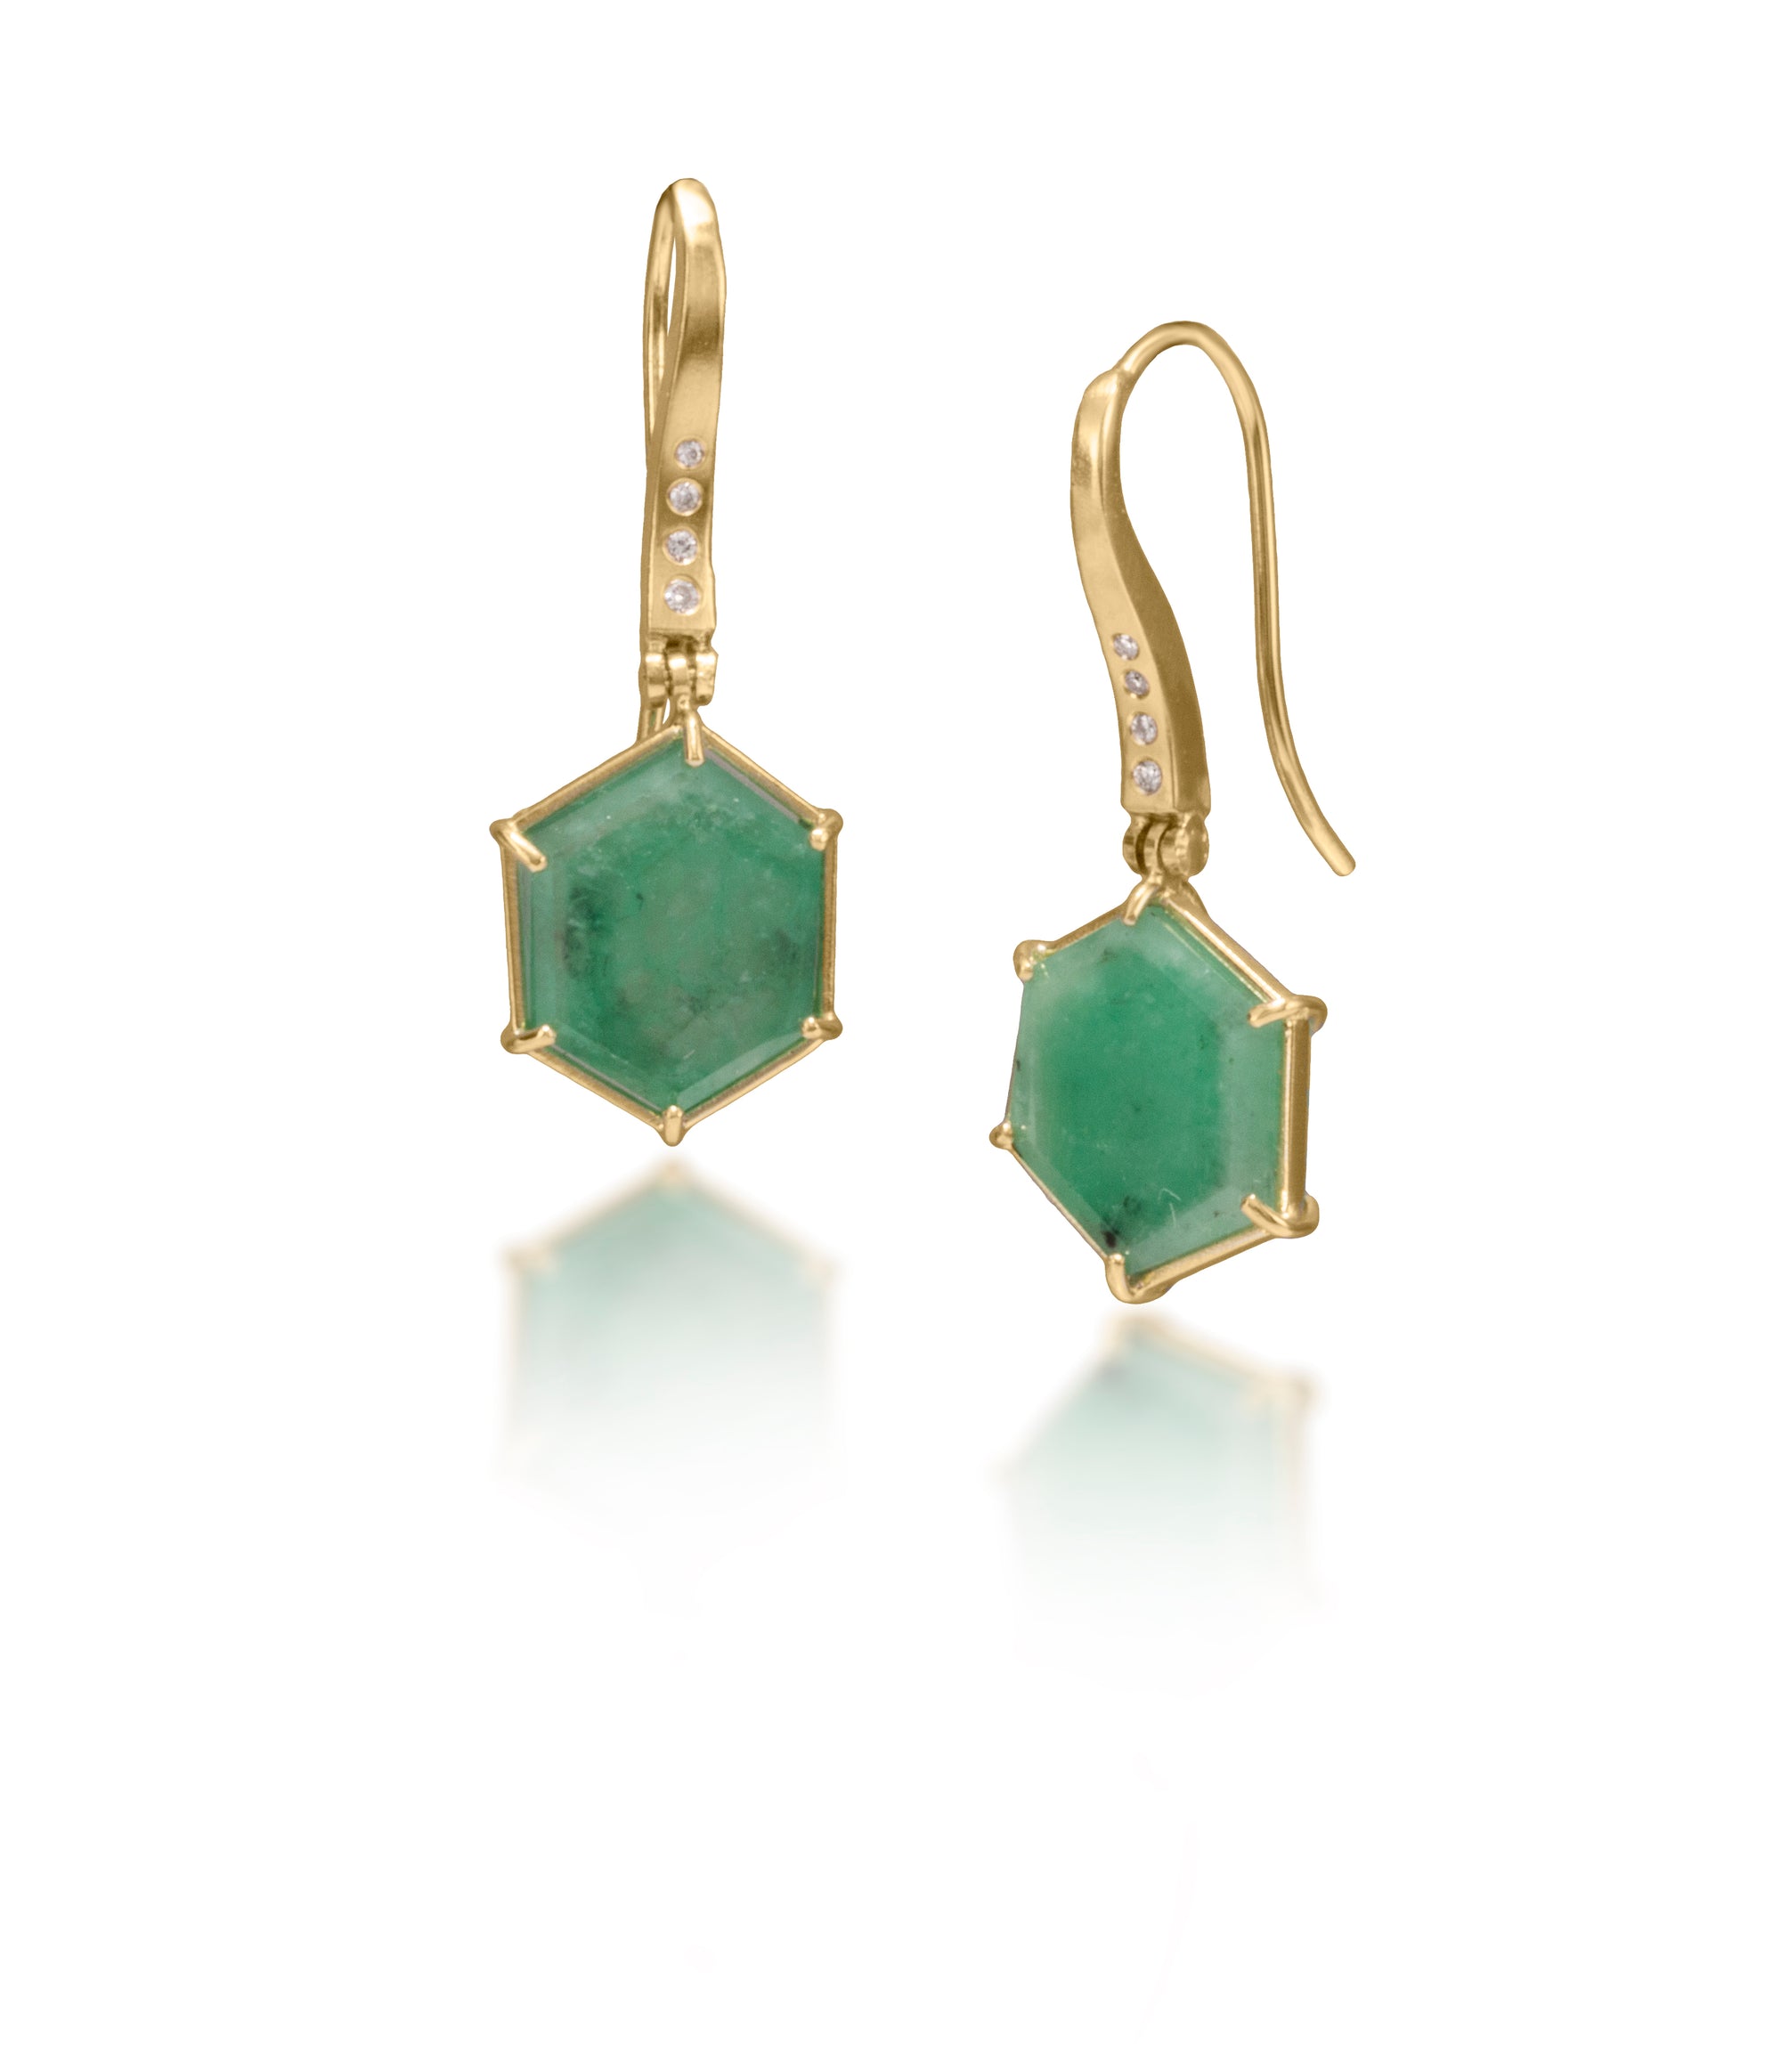 One of a kind earrings featuring 7.25 total carats natural emerald hexagons prong set in 18k and hinged from a delicate 18k ear wires, each set with 4 white diamonds. Diamond 0.06 tcw.